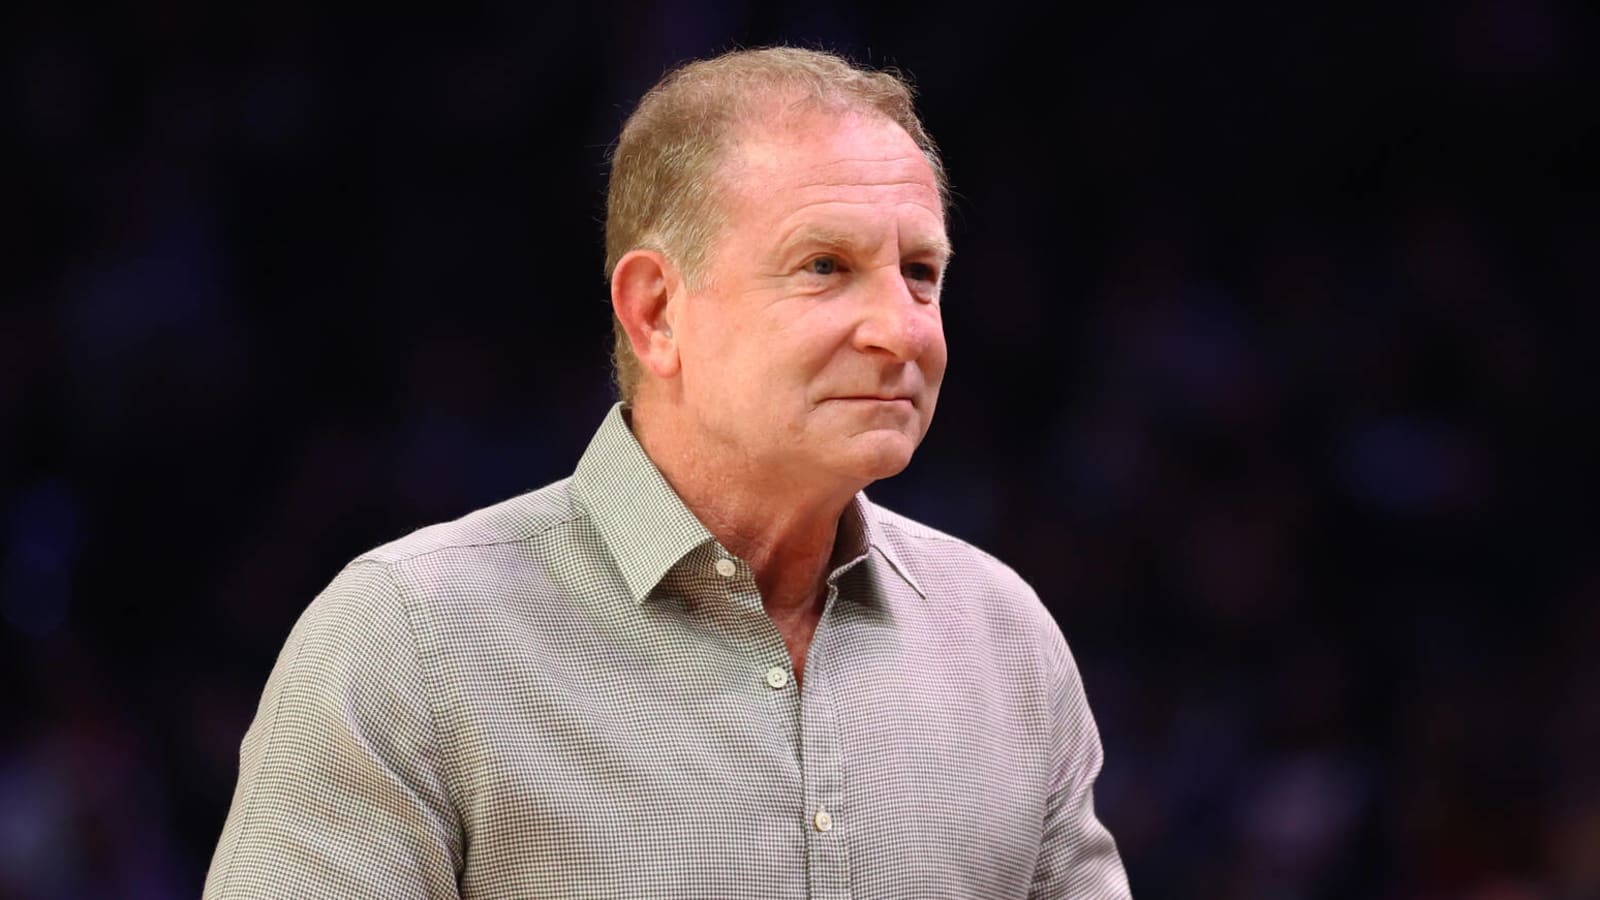 Suns owner Robert Sarver suspended one year, fined $10M